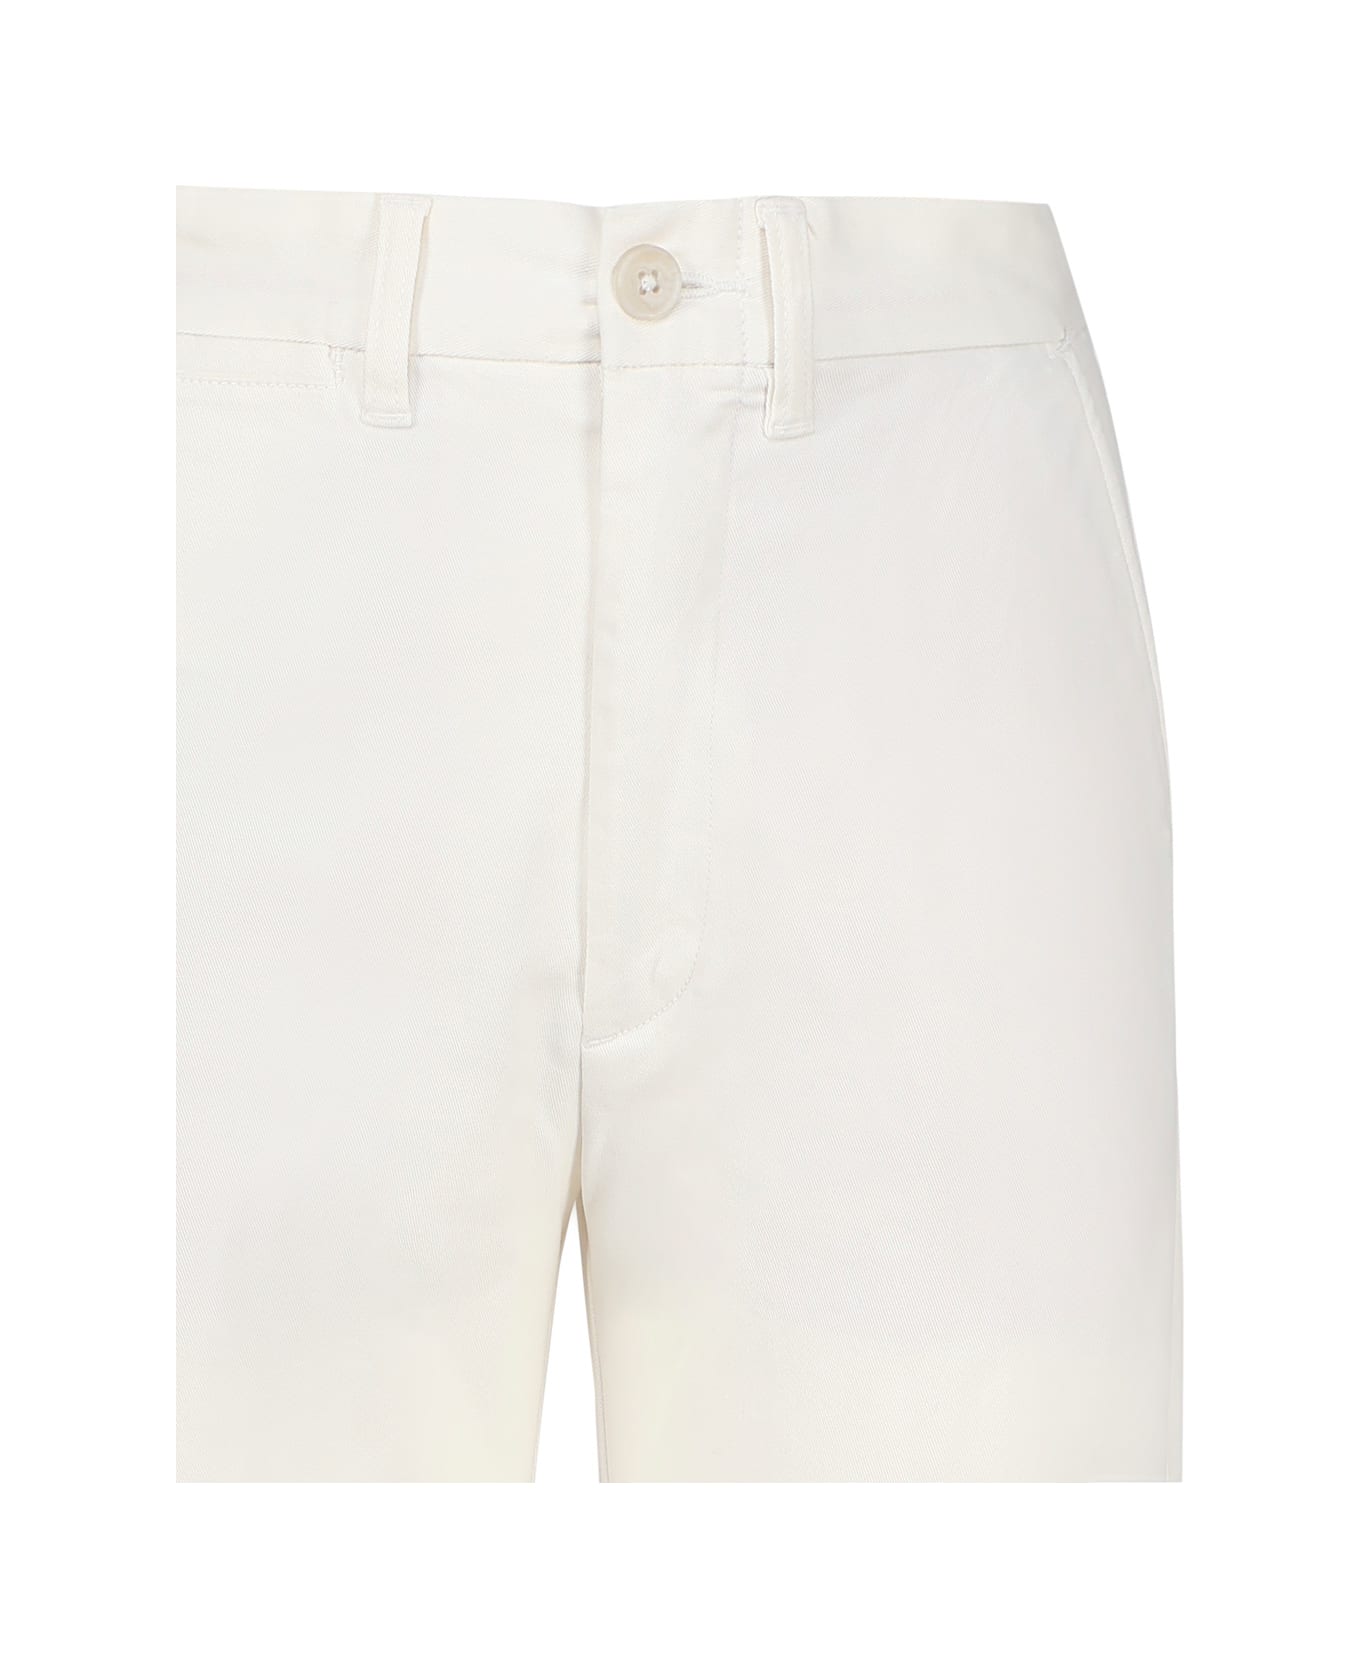 Ralph Lauren Flared Cropped Trousers - Warm White ボトムス